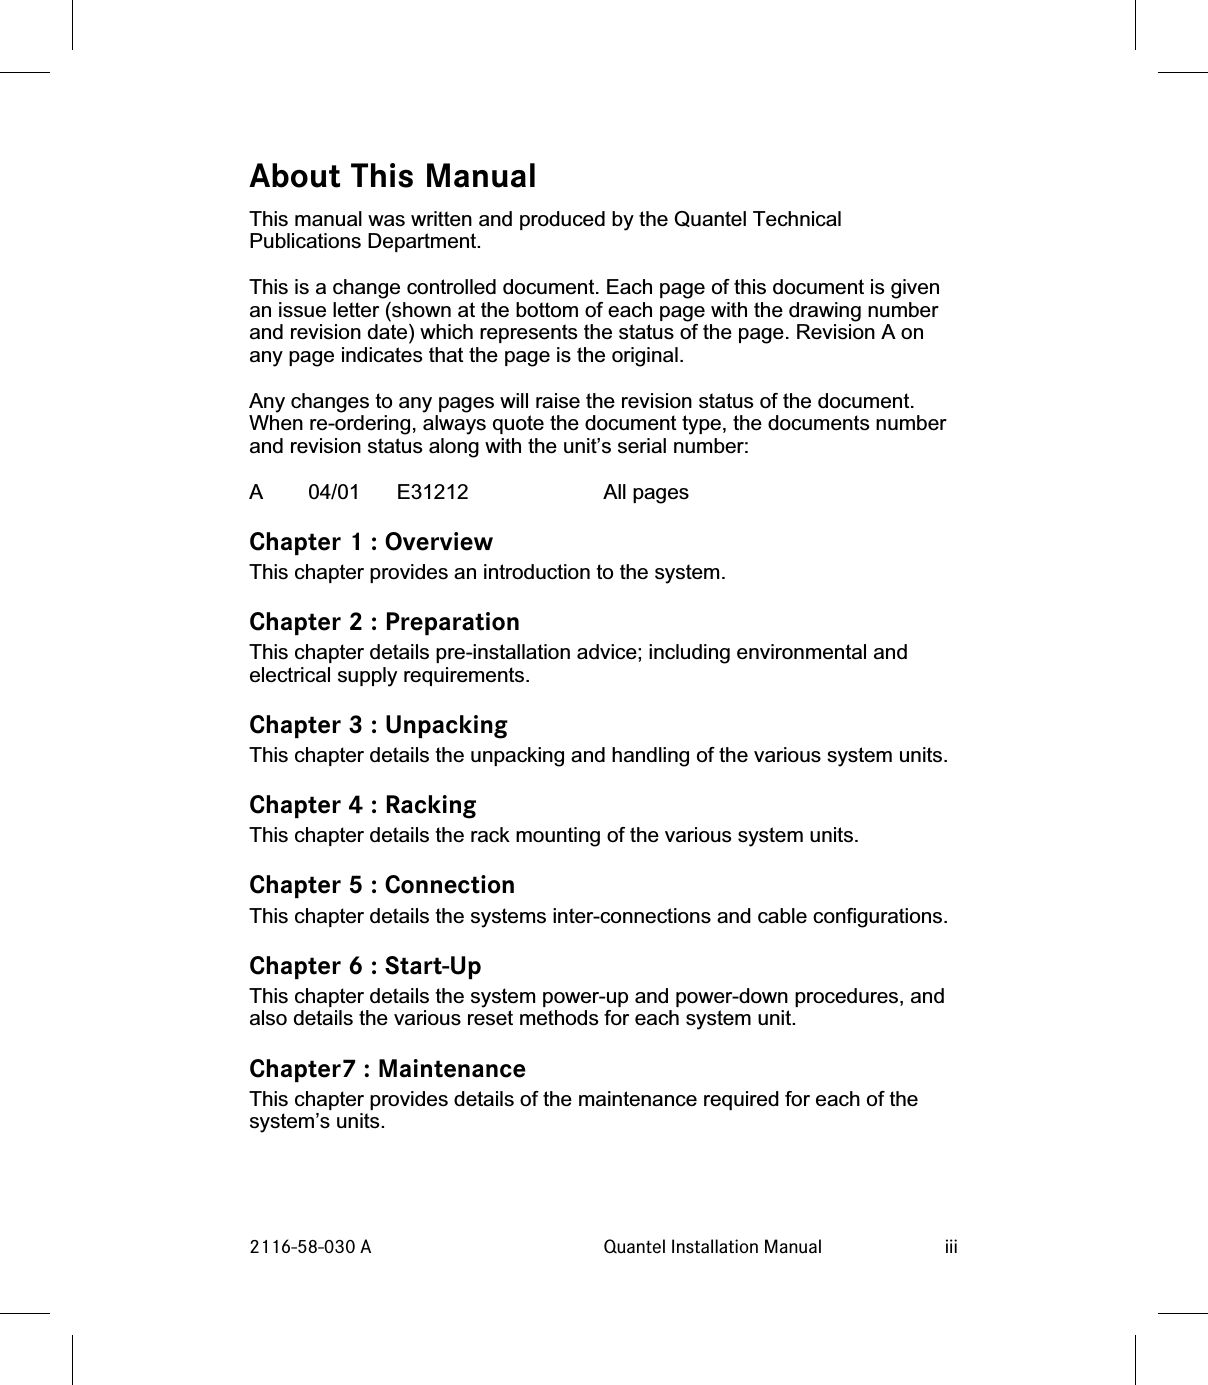 About This ManualThis manual was written and produced by the Quantel TechnicalPublications Department.This is a change controlled document. Each page of this document is givenan issue letter (shown at the bottom of each page with the drawing numberand revision date) which represents the status of the page. Revision A onany page indicates that the page is the original.Any changes to any pages will raise the revision status of the document.When re-ordering, always quote the document type, the documents numberand revision status along with the unit’s serial number:A 04/01 E31212 All pagesChapter 1 : OverviewThis chapter provides an introduction to the system.Chapter 2 : PreparationThis chapter details pre-installation advice; including environmental andelectrical supply requirements.Chapter 3 : UnpackingThis chapter details the unpacking and handling of the various system units.Chapter 4 : RackingThis chapter details the rack mounting of the various system units.Chapter 5 : ConnectionThis chapter details the systems inter-connections and cable configurations.Chapter 6 : Start-UpThis chapter details the system power-up and power-down procedures, andalso details the various reset methods for each system unit.Chapter7 : MaintenanceThis chapter provides details of the maintenance required for each of thesystem’s units.2116-58-030 A Quantel Installation Manual iii